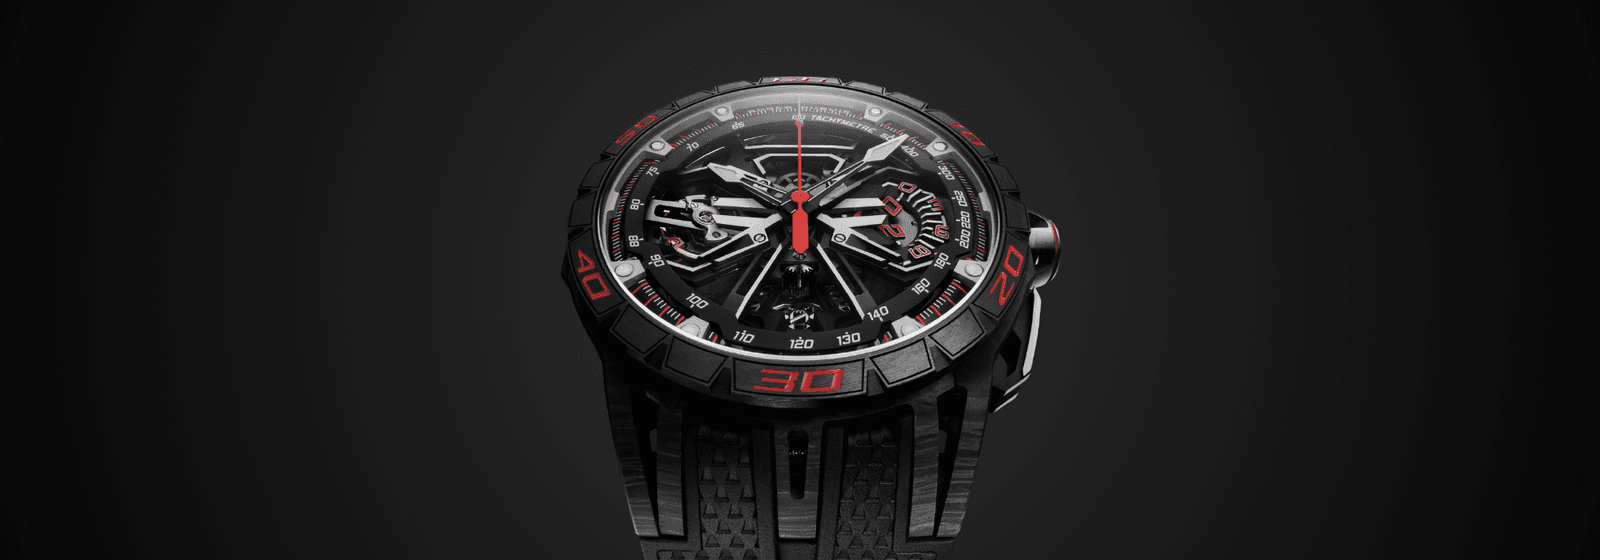 Unleashing Hyper Horology™: The Excalibur Spider Flyback Chronograph Unveiled